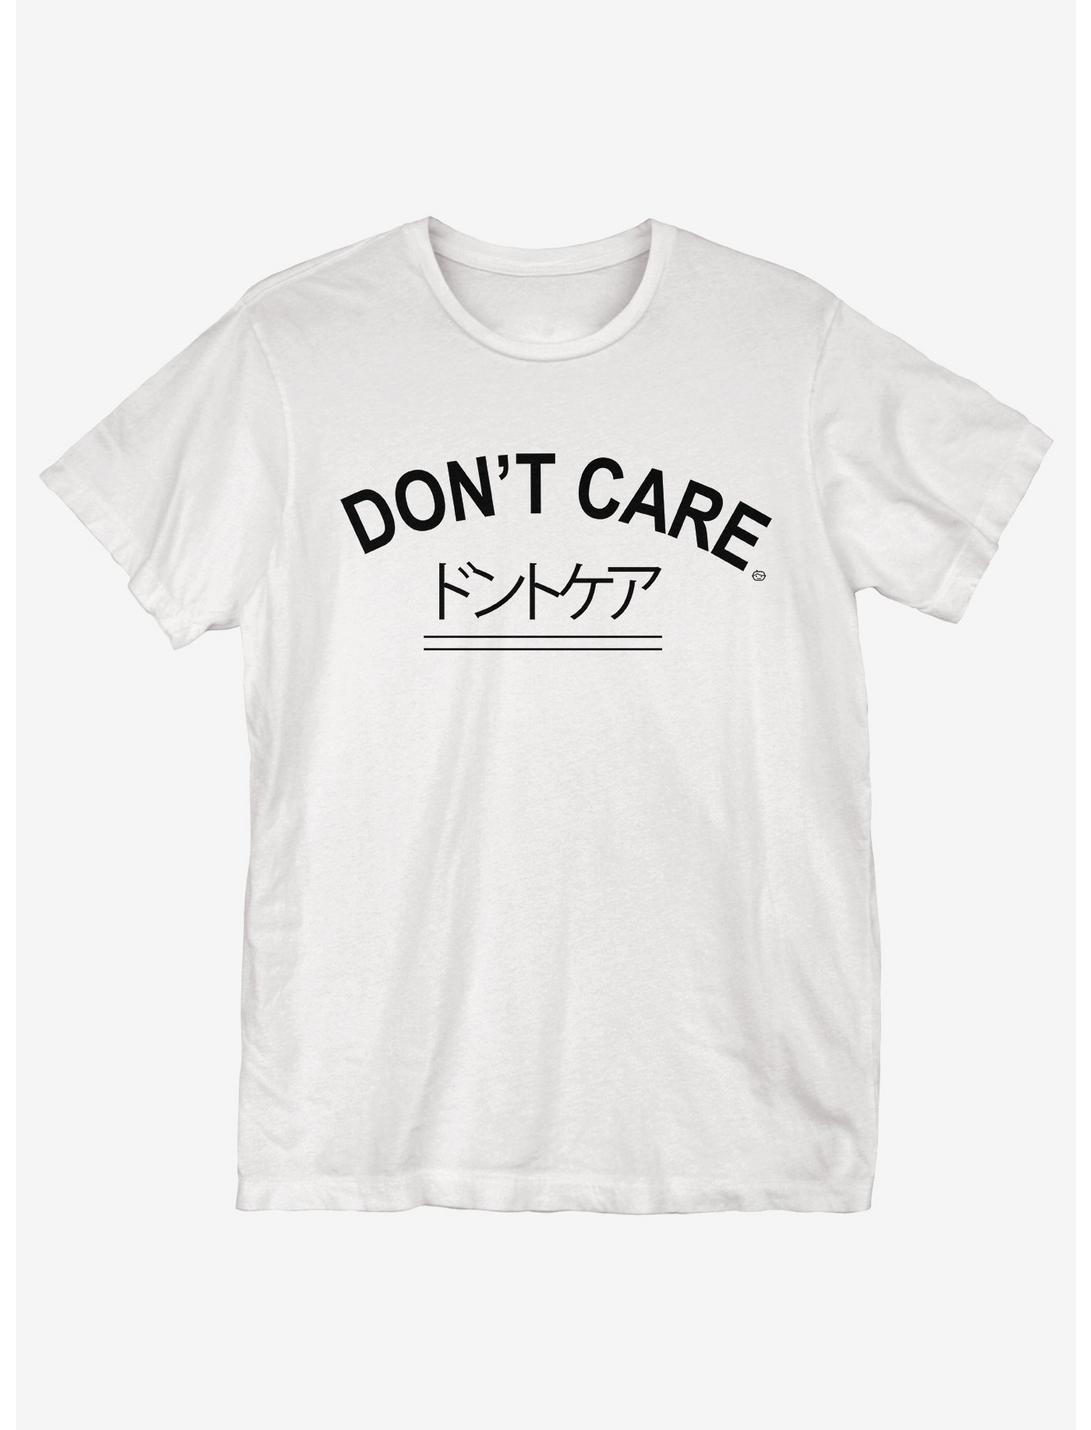 Don't Care Japanese Text T-Shirt, WHITE, hi-res